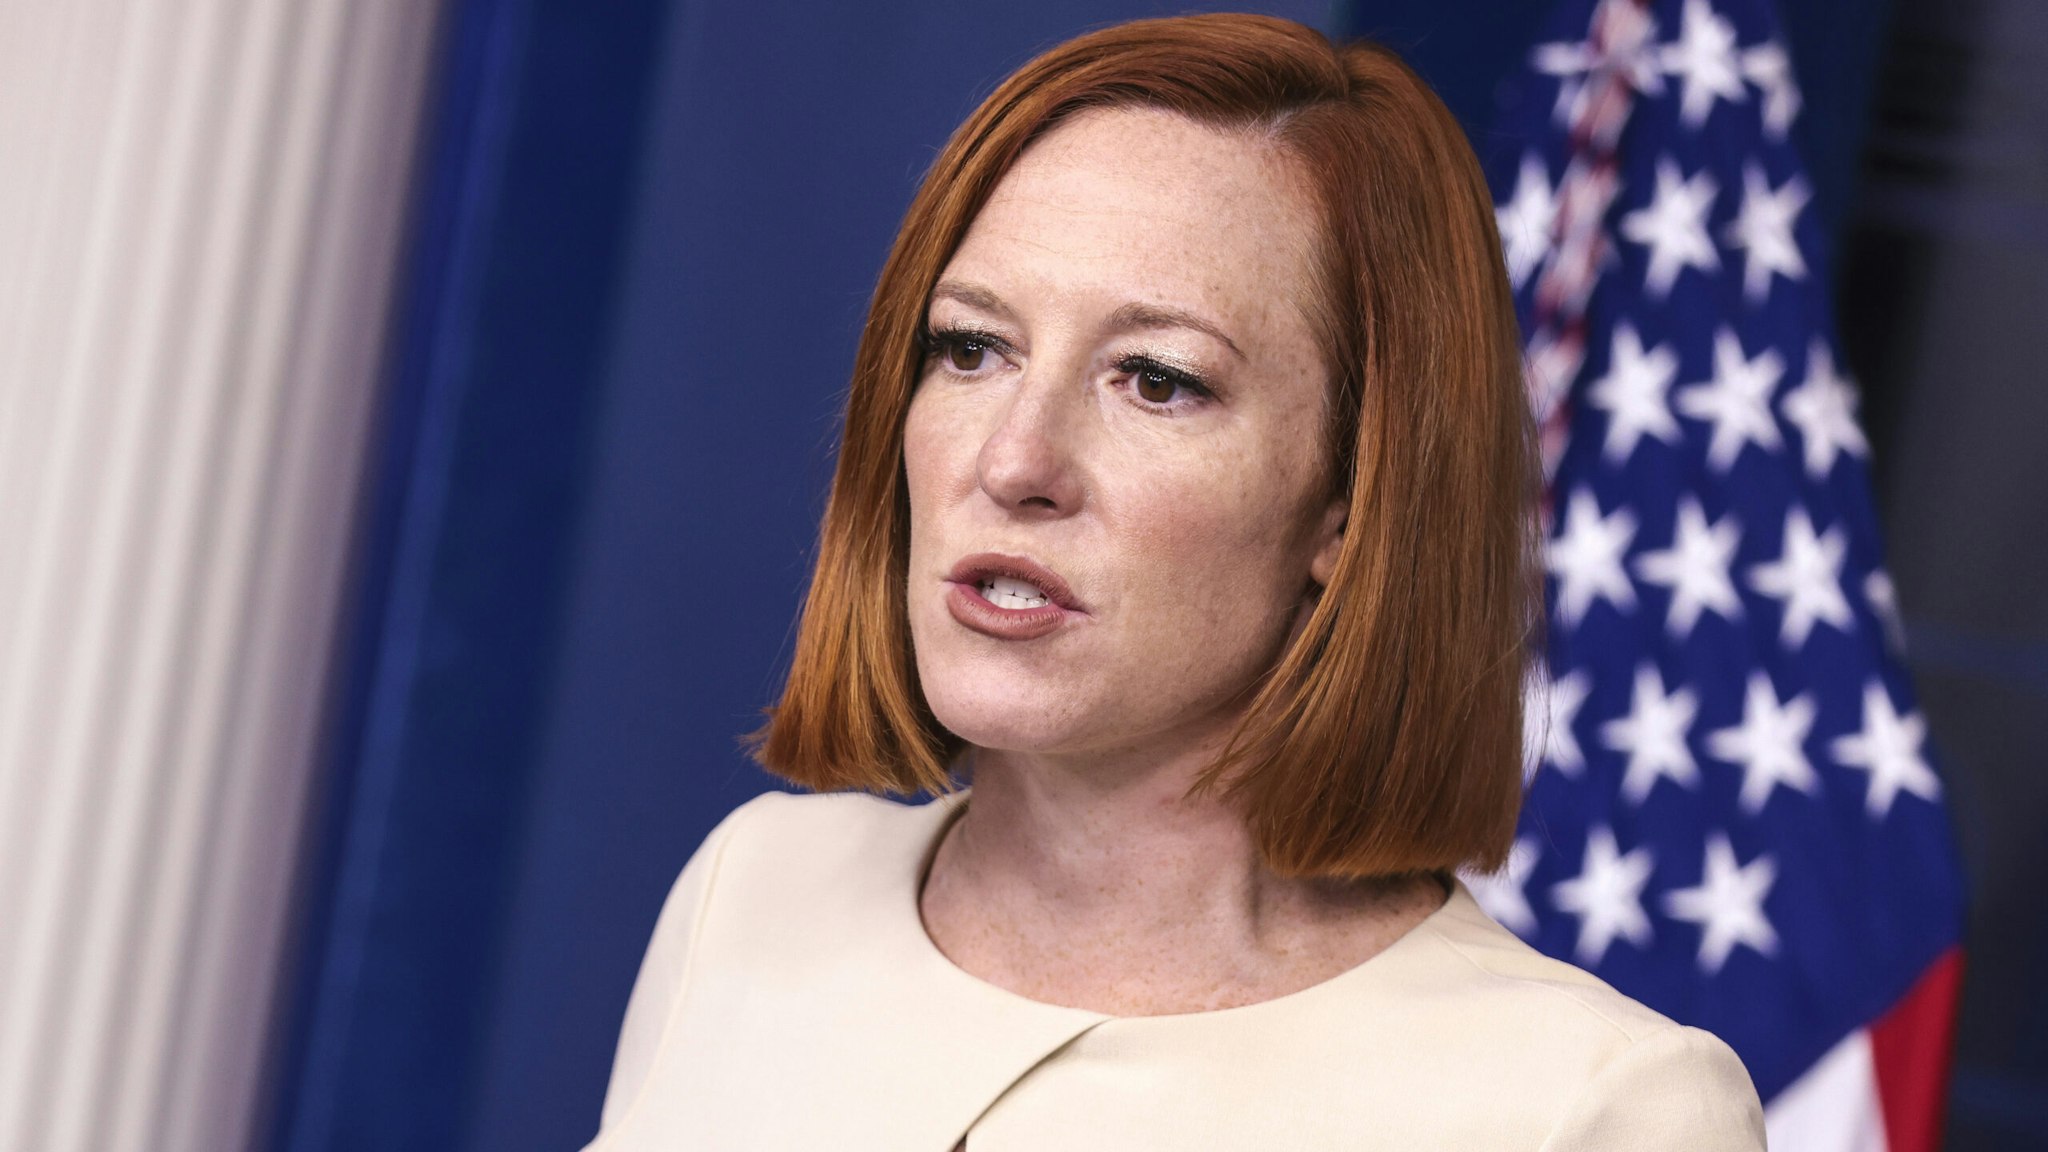 Jen Psaki, White House press secretary, speaks during a news conference in the James S. Brady Press Briefing Room at the White House in Washington, D.C., U.S., on Tuesday, Nov. 23, 2021. The U.S. will release 50 million barrels of crude from its strategic reserves in concert with China, Japan, India, South Korea and the U.K., an unprecedented, coordinated attempt by the world's largest oil consumers to tame prices that risks a backlash by OPEC+.